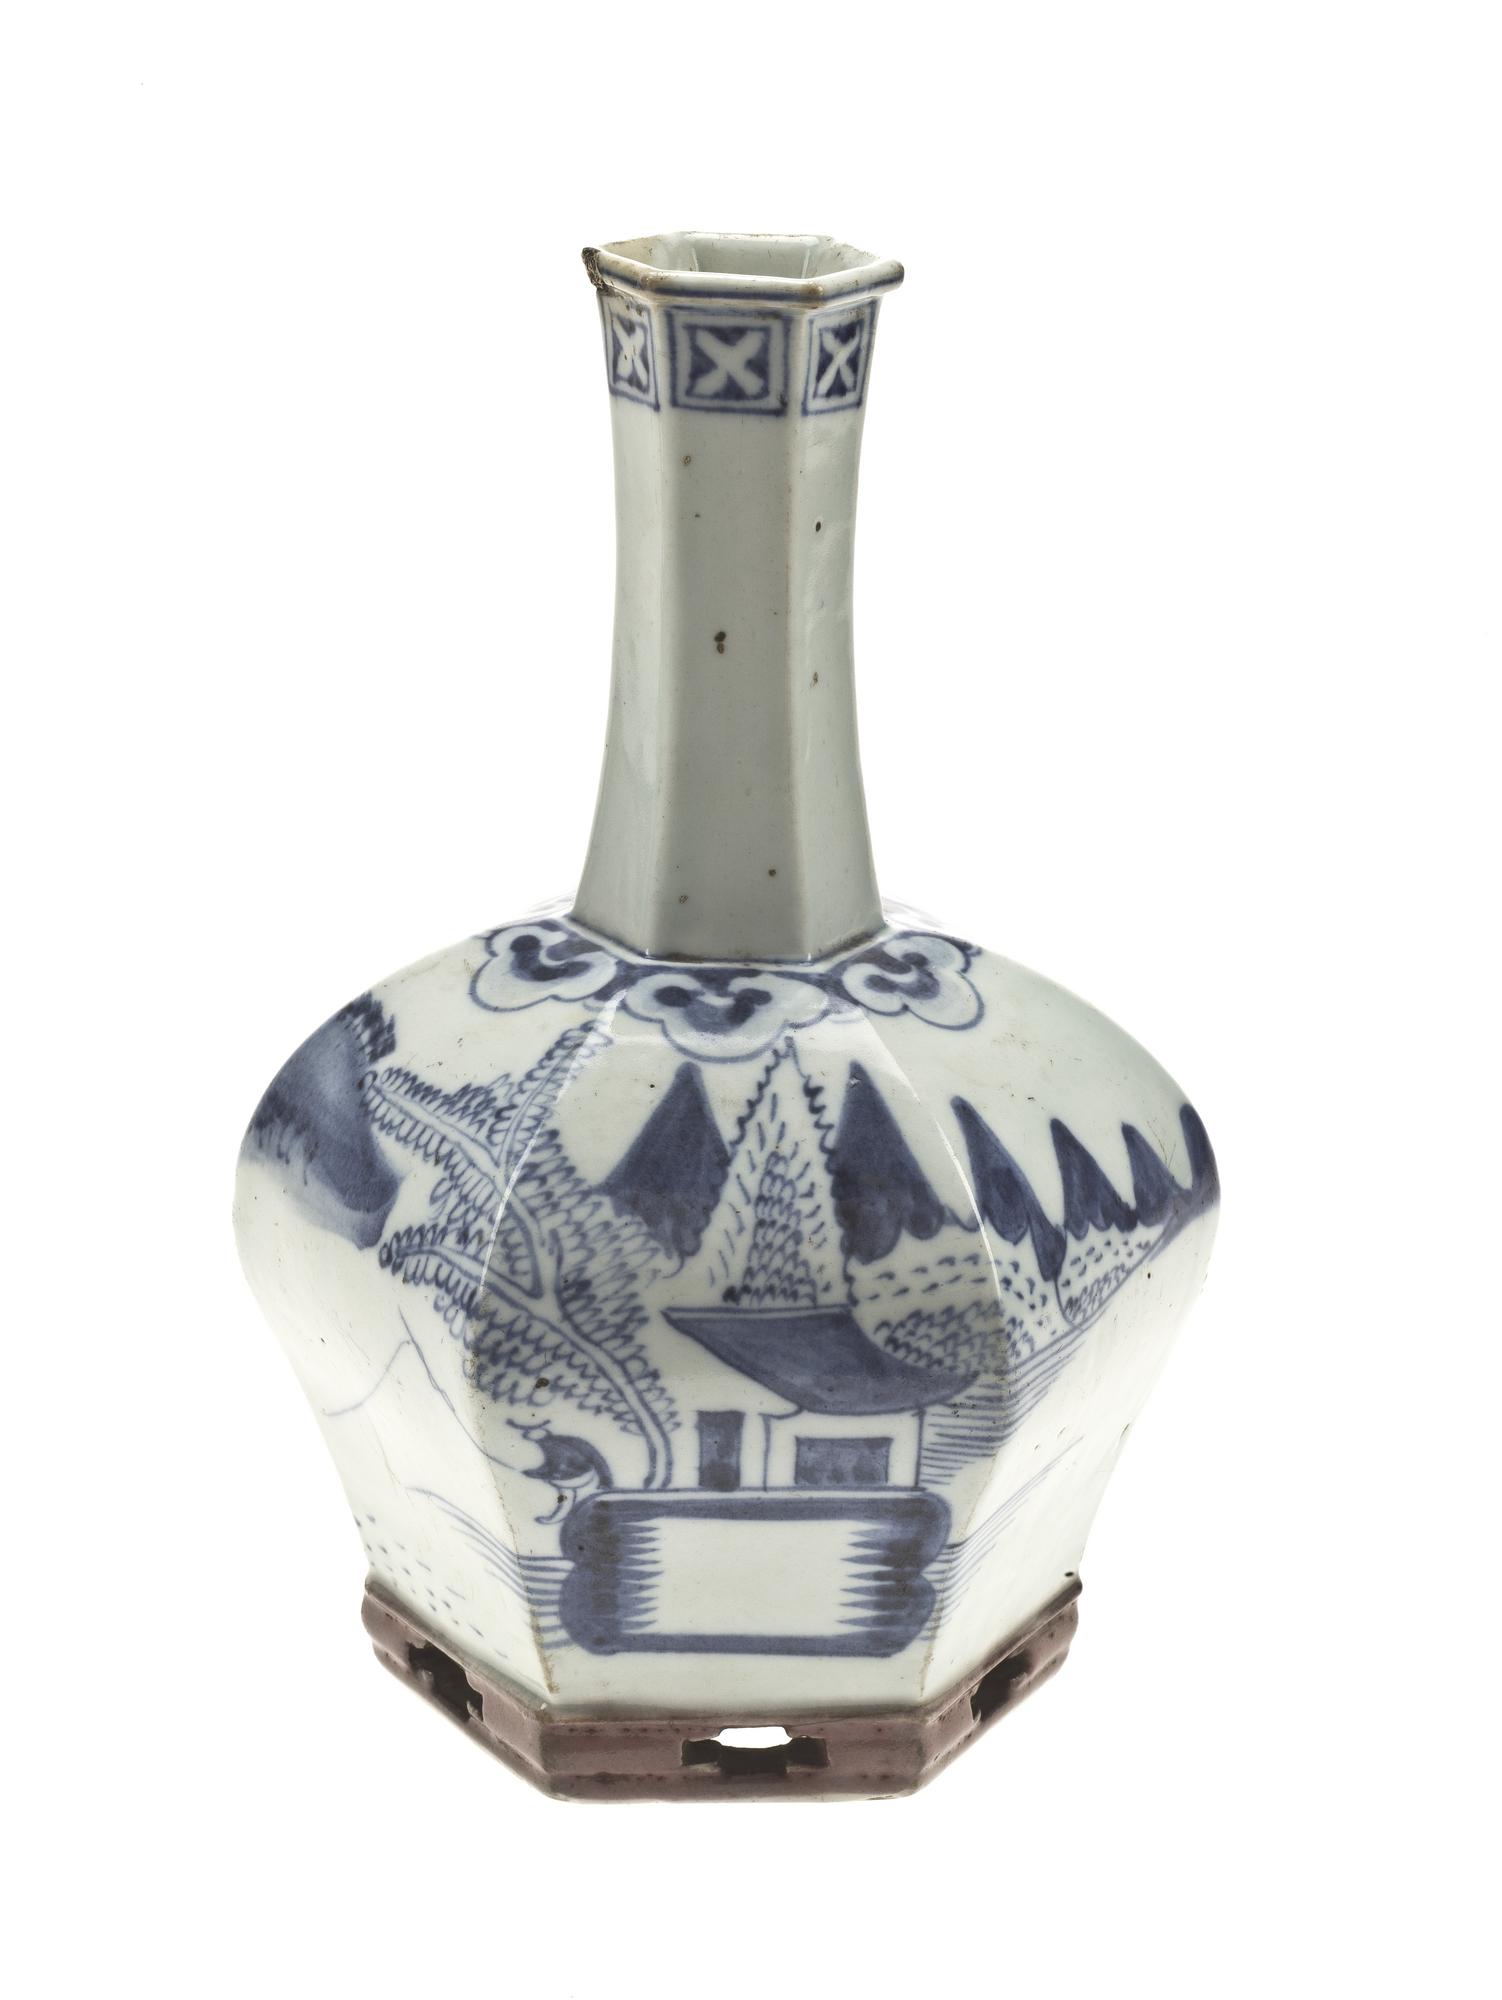 Vase of glazed resonant porcelain, bulbous and hexagonal with a perforated foot, with underglaze blue decoration of a fisherman in a landscape: Korea, 16th-17th century.